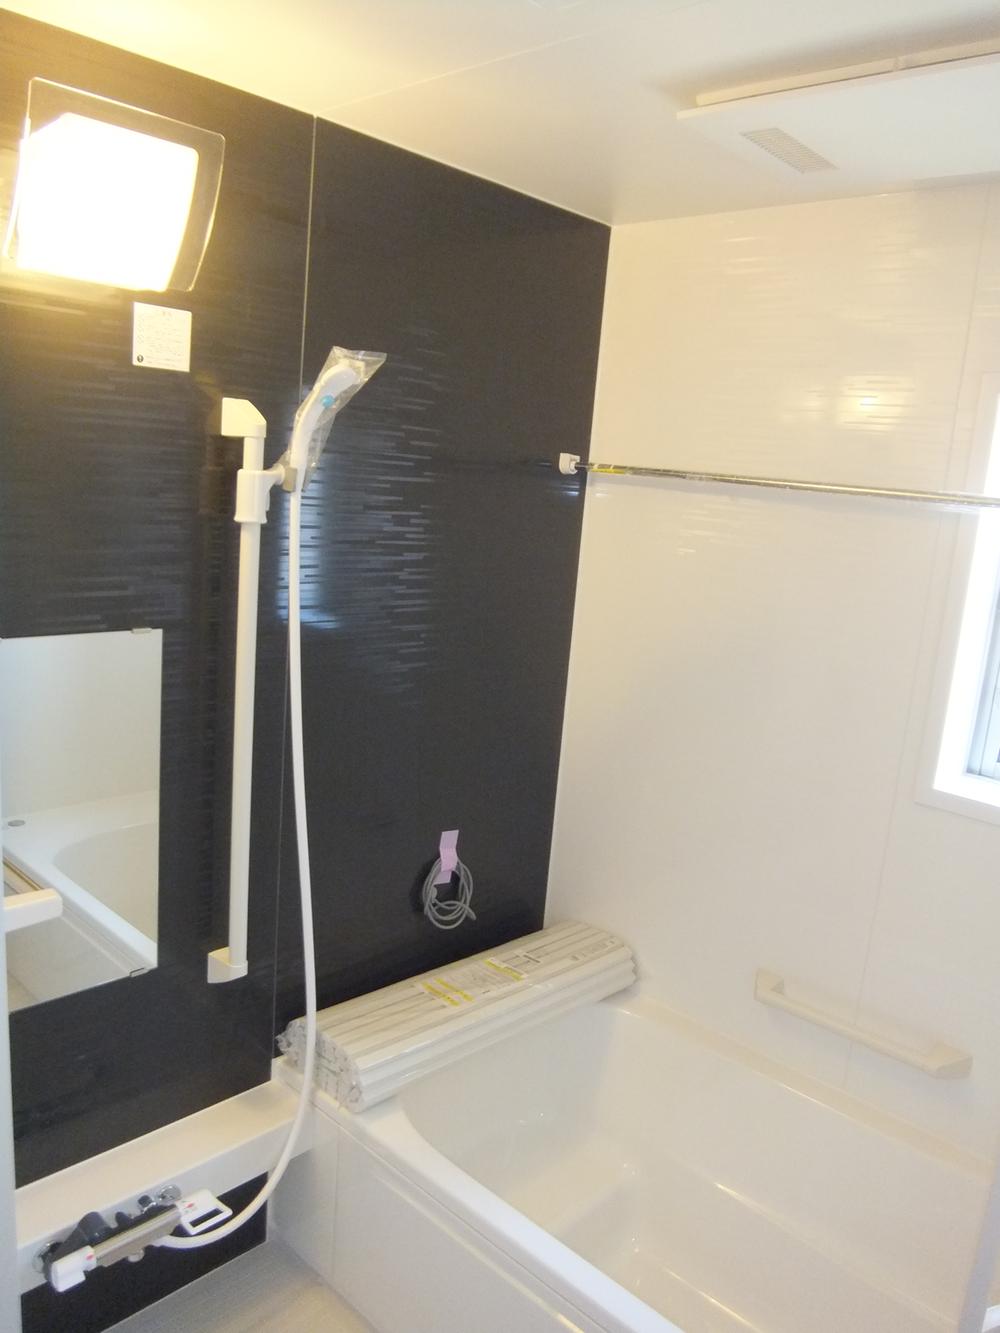 Same specifications photo (bathroom). Example of construction (bus with bathroom dryer)